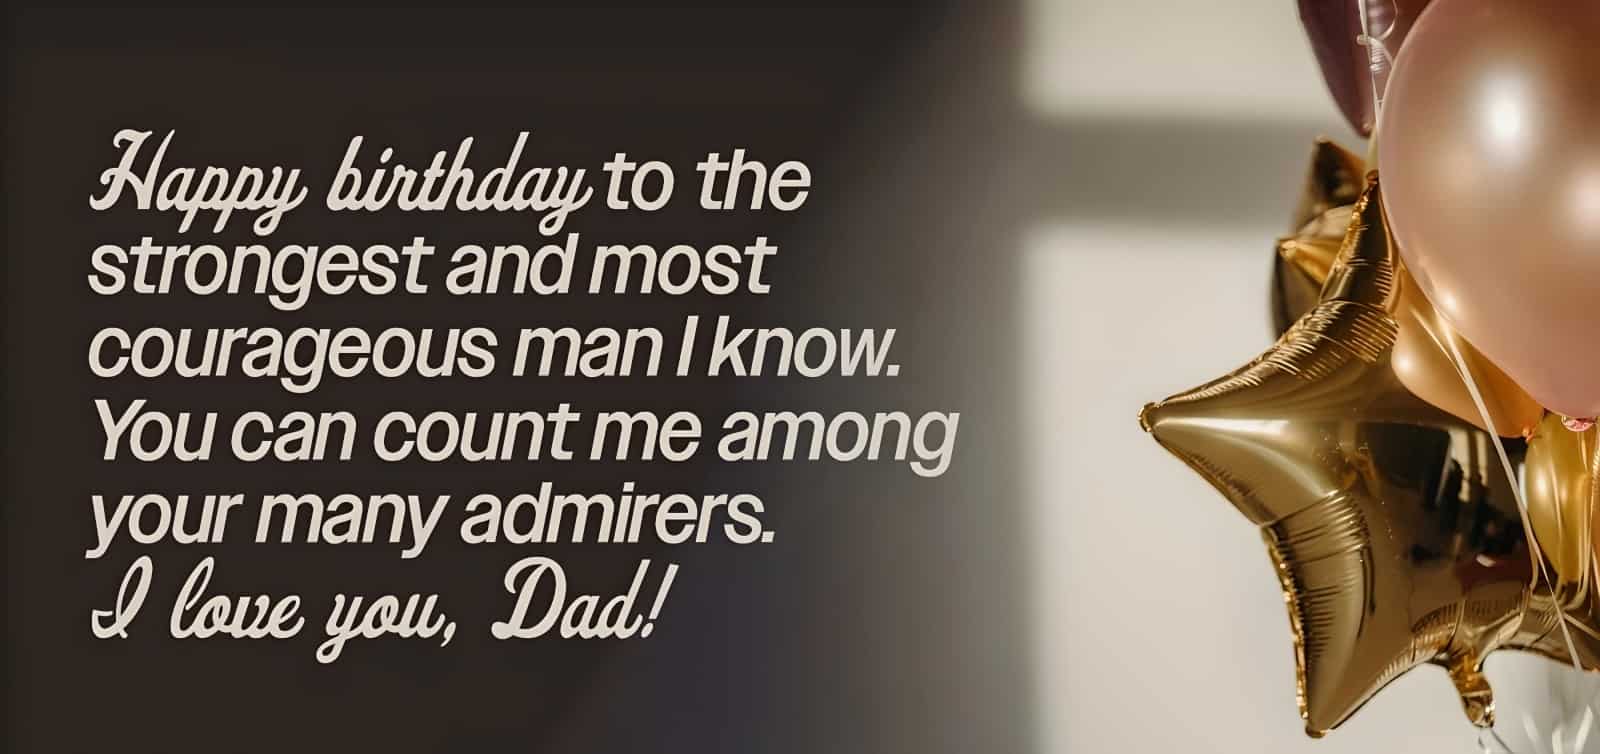 Happy Birthday Messages and Wishes for Fathers